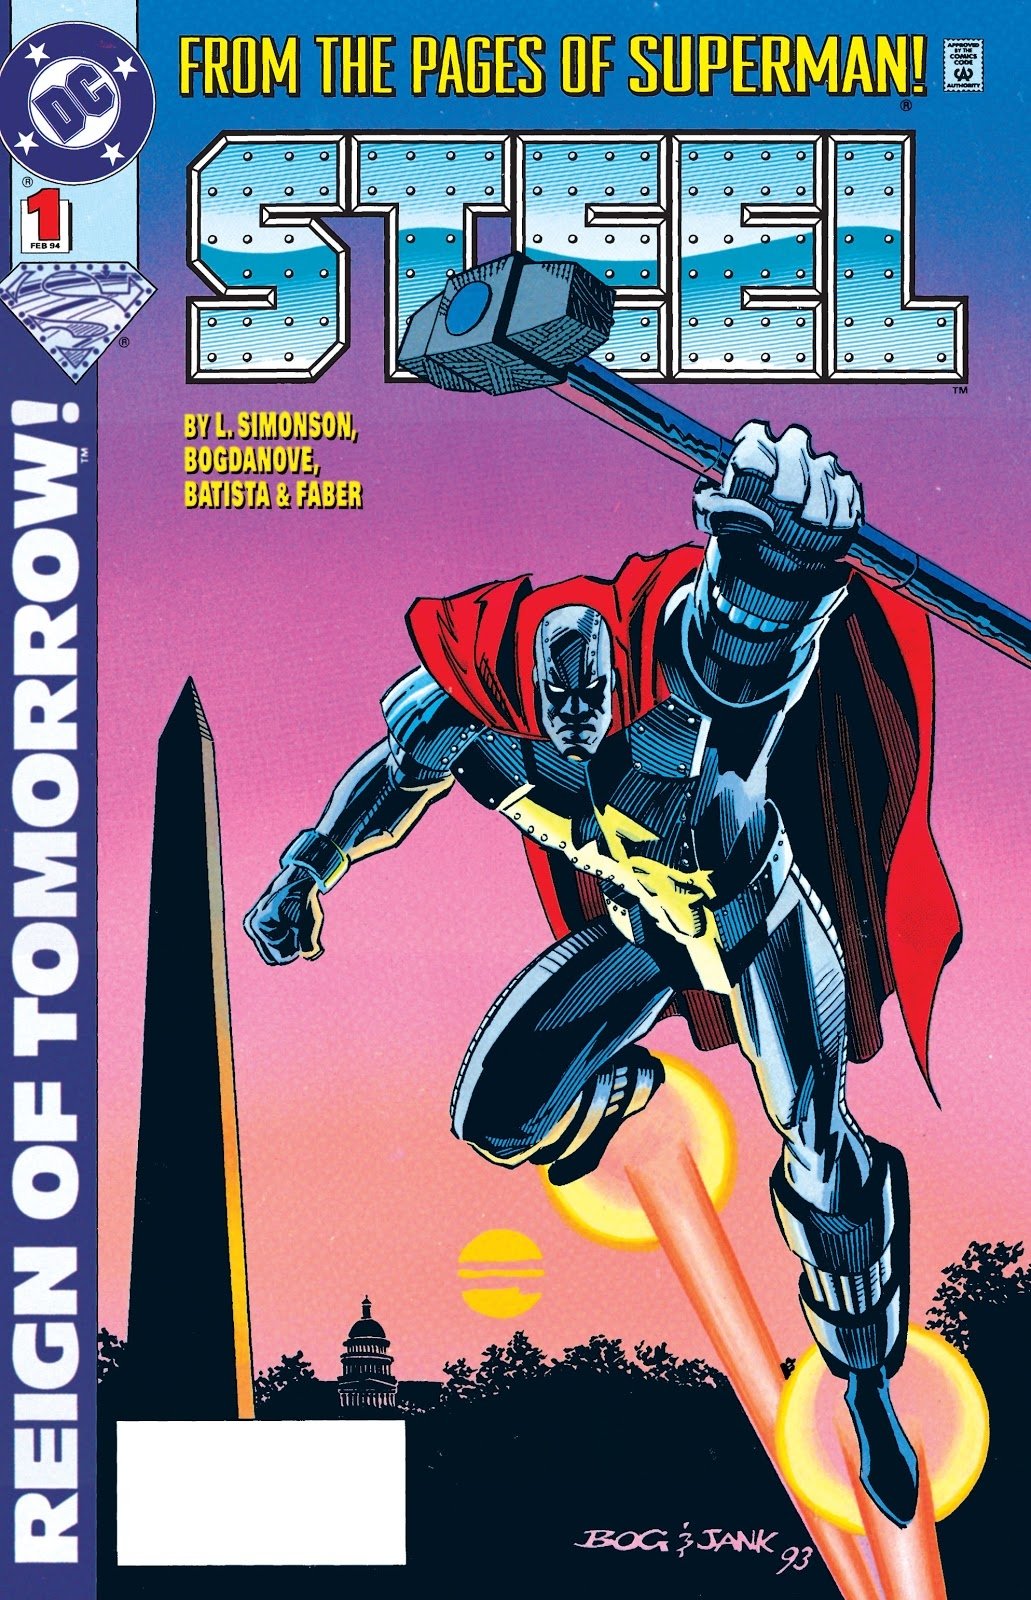 Superboy Vol 4 01 Cover Version By Tom Grummett In Pepe Caldelass Covers Recreations As 5195